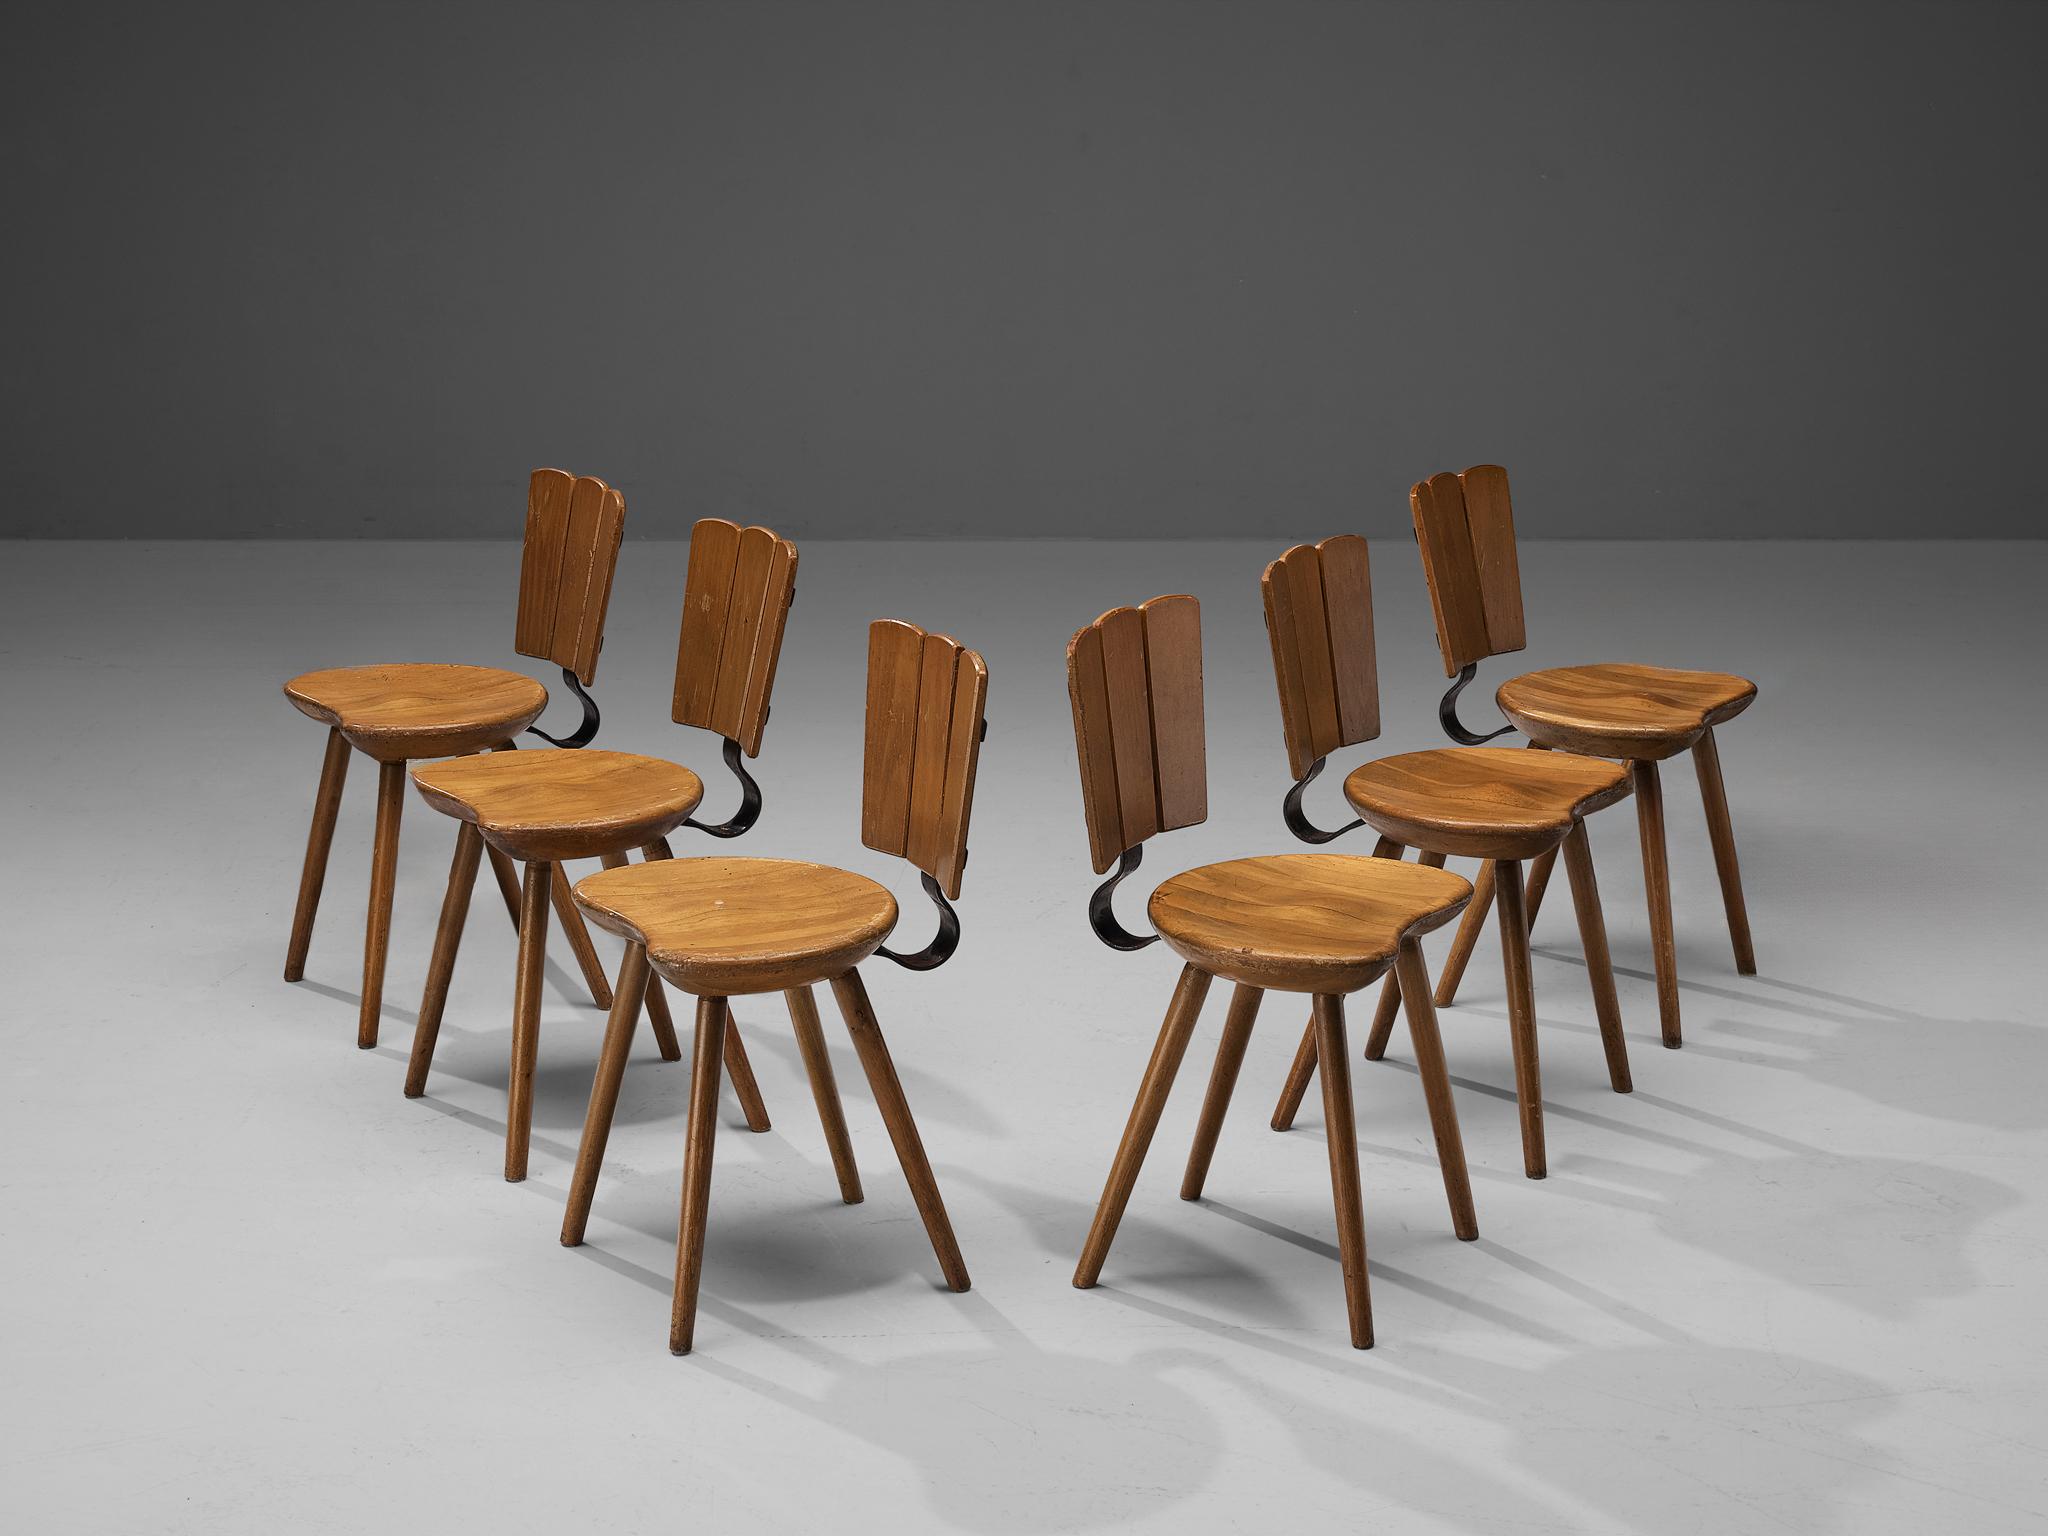 Dining chairs, stained beech, cast iron, The Netherlands, 1970s. 

Rustic set of six Dutch dining chairs made in the 1970s. This design in stained beech features a curved cast iron backrest support. Despite the sturdy look of the design, these